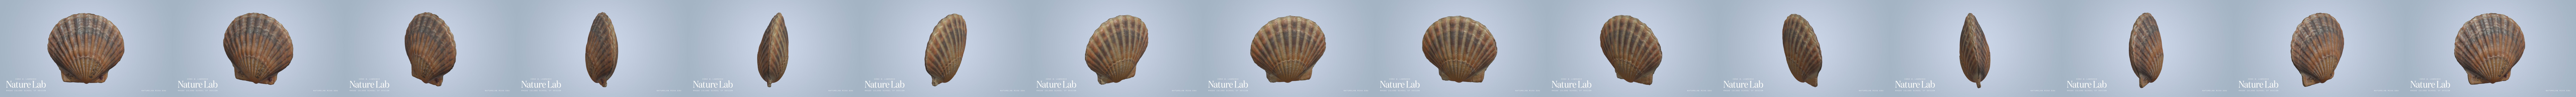 108,258 Scallop Shell Images, Stock Photos, 3D objects, & Vectors